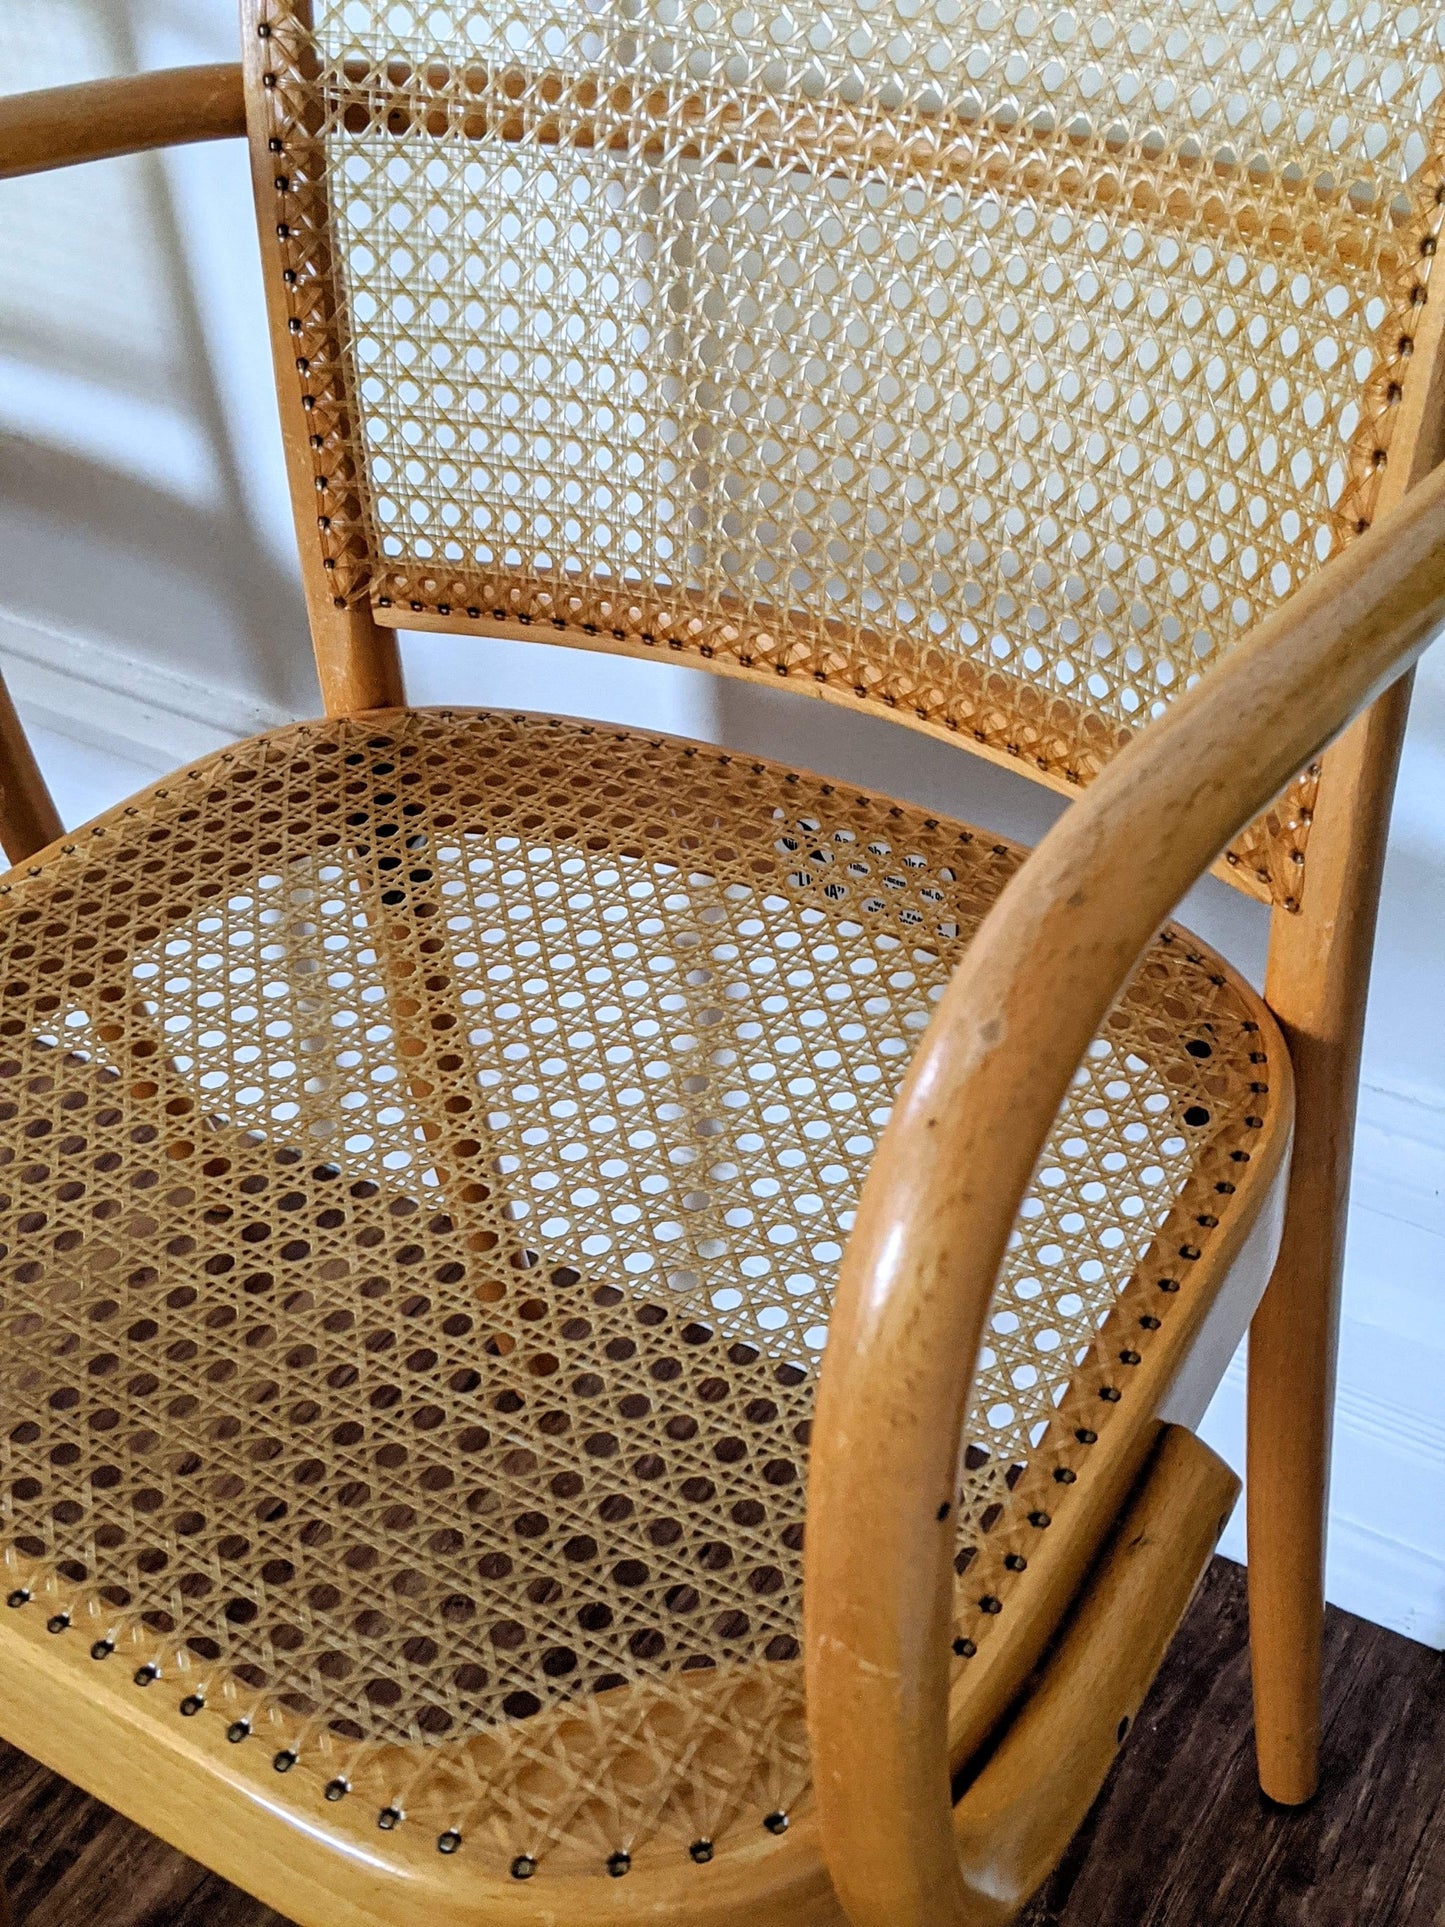 The Prague Bentwood Chairs(Only 1 left!)